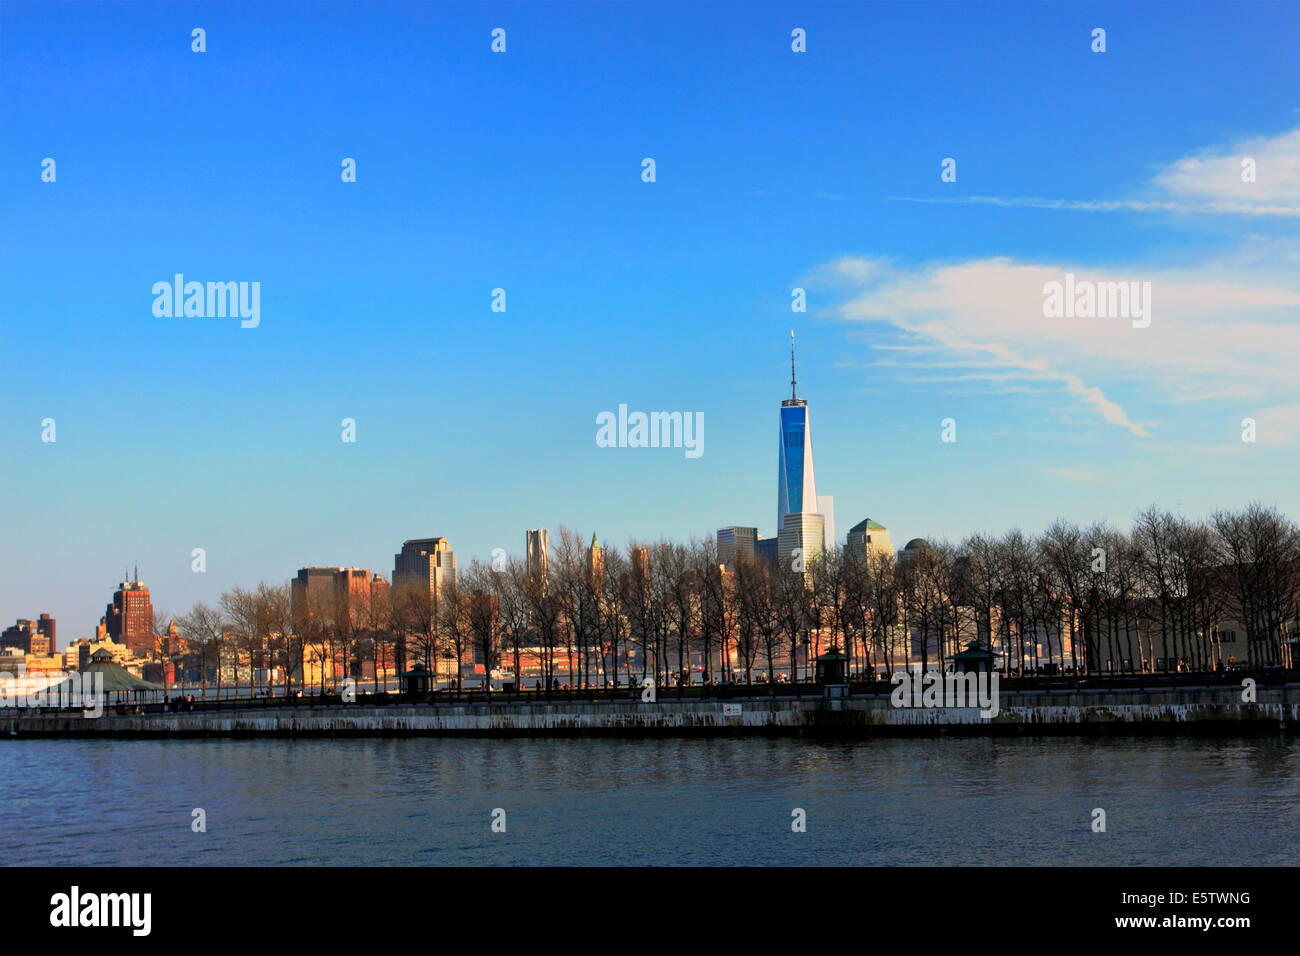 The Freedom Tower / One World Trade Center in lower Manhattan New York City as viewed from across the Hudson River in Hoboken New Jersey Stock Photo